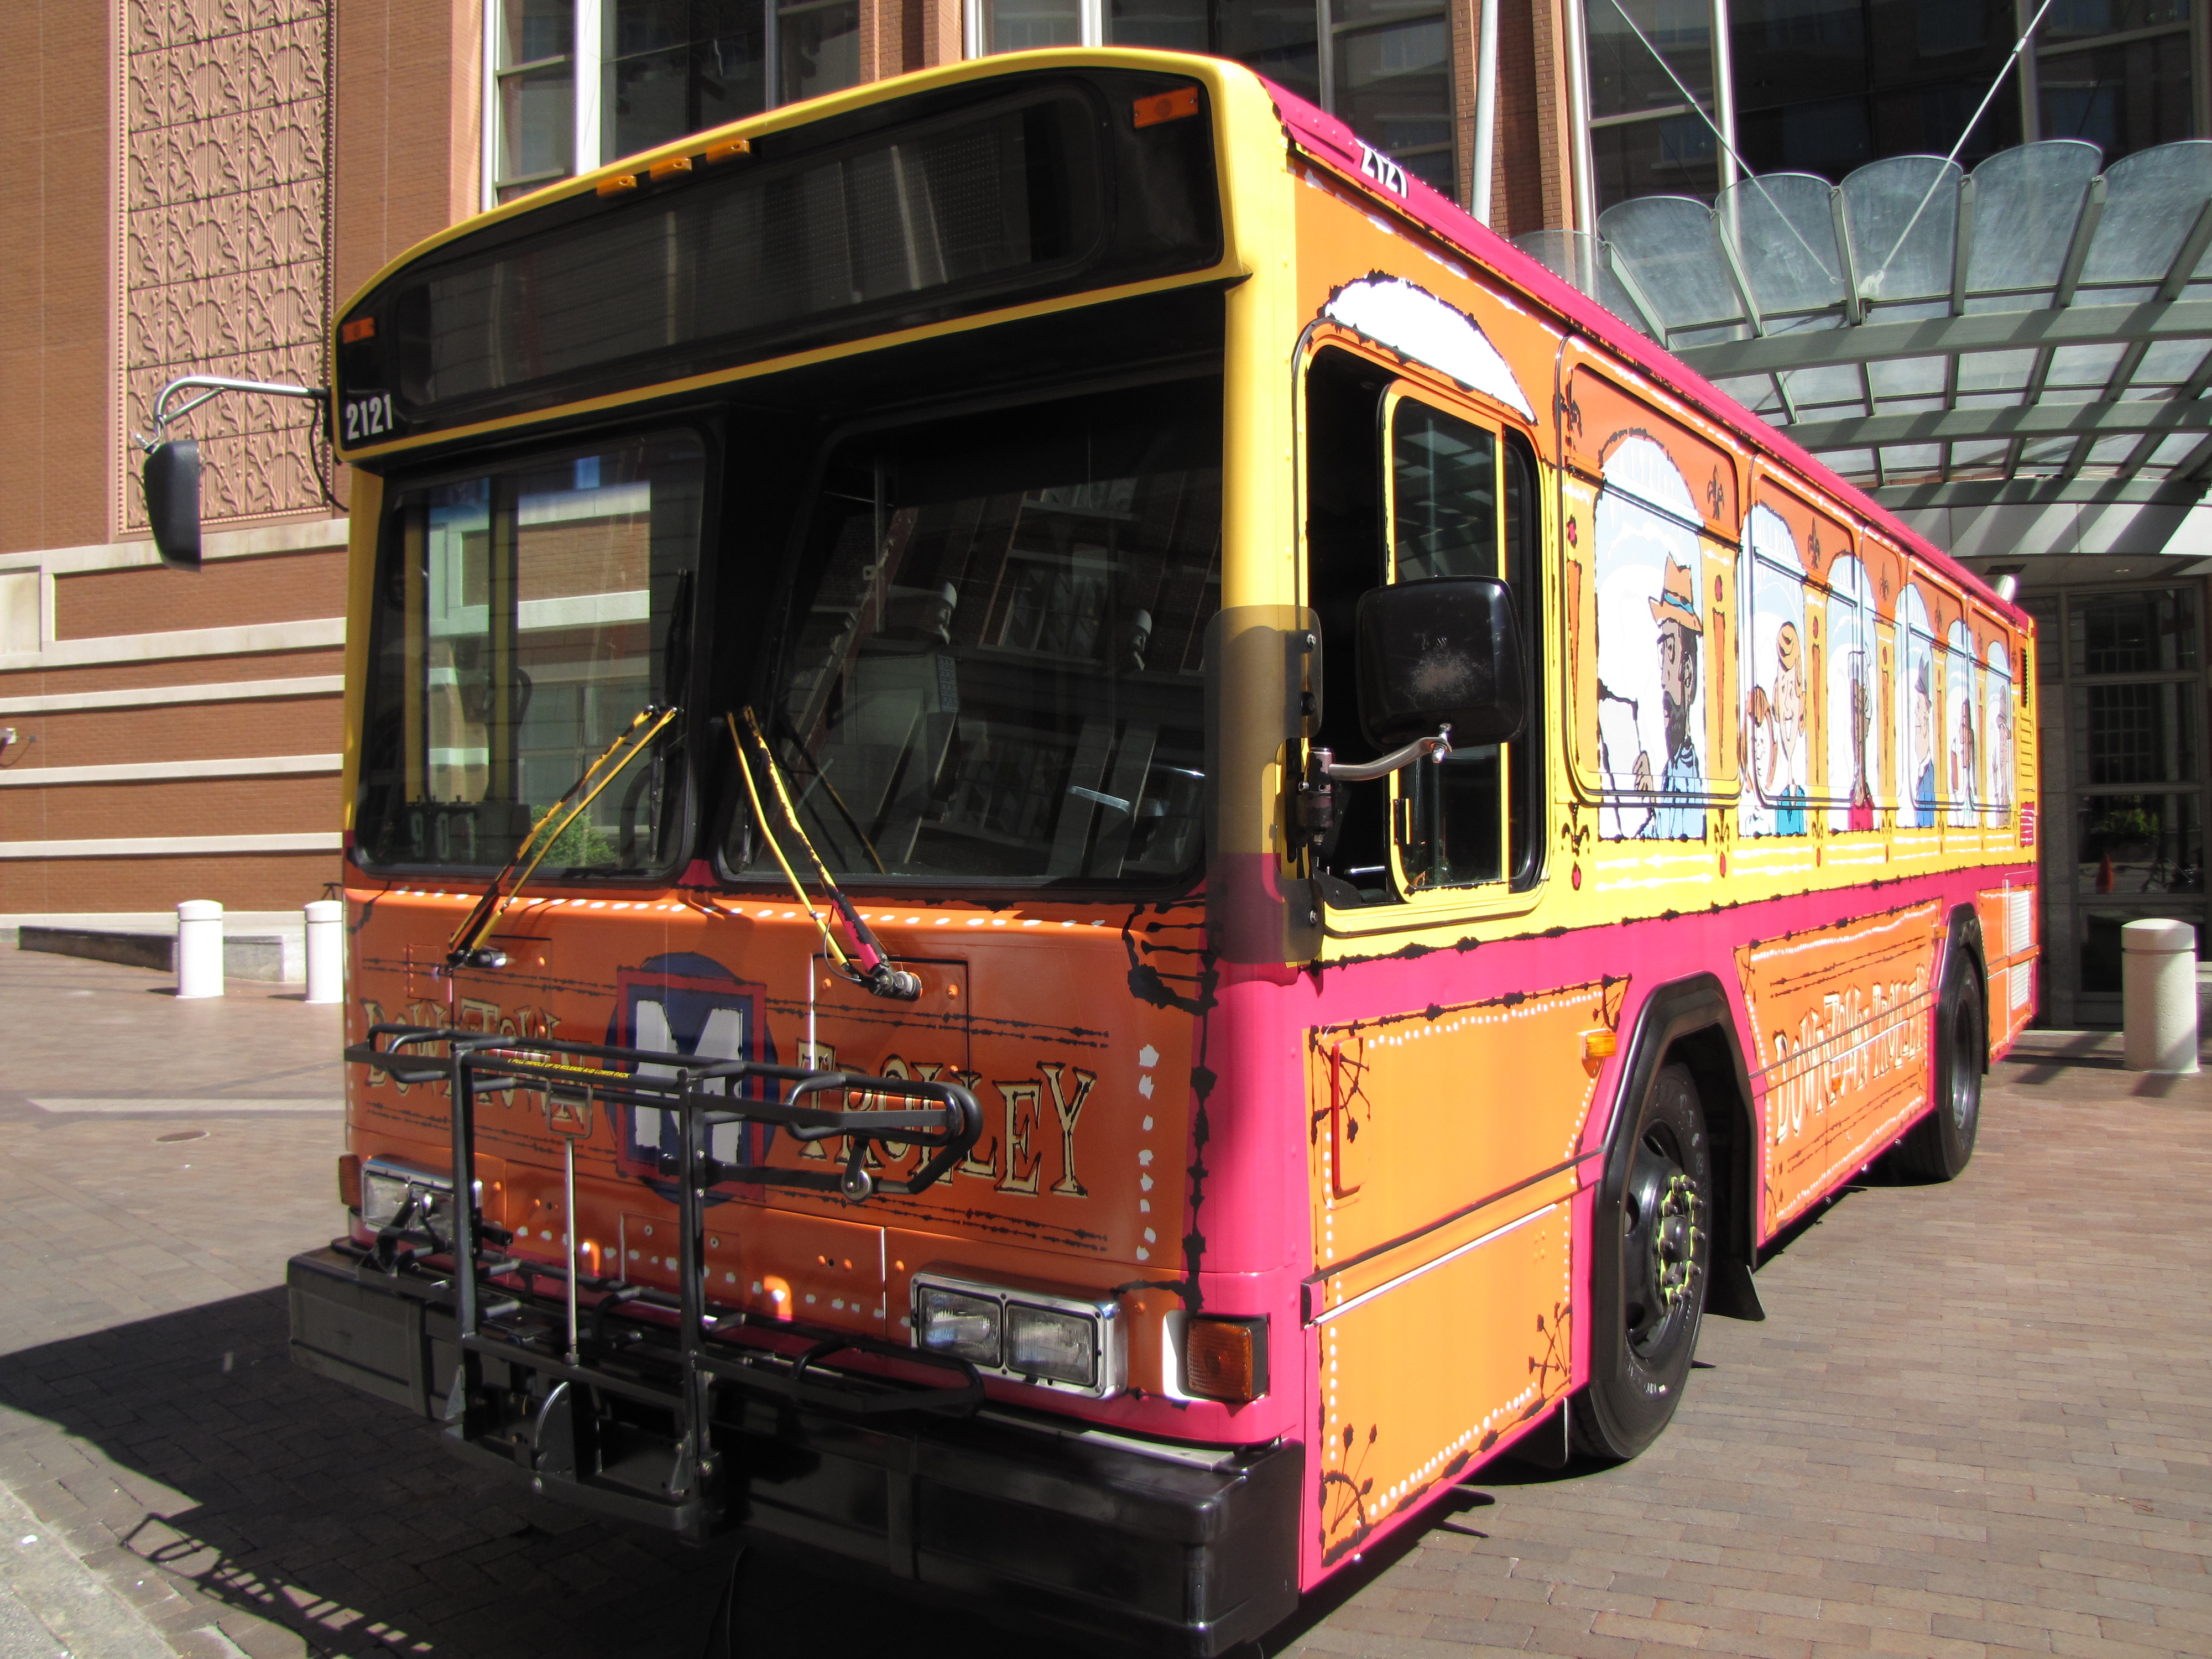 Introducing the #99 Downtown Trolley! | Metro Transit – St. Louis